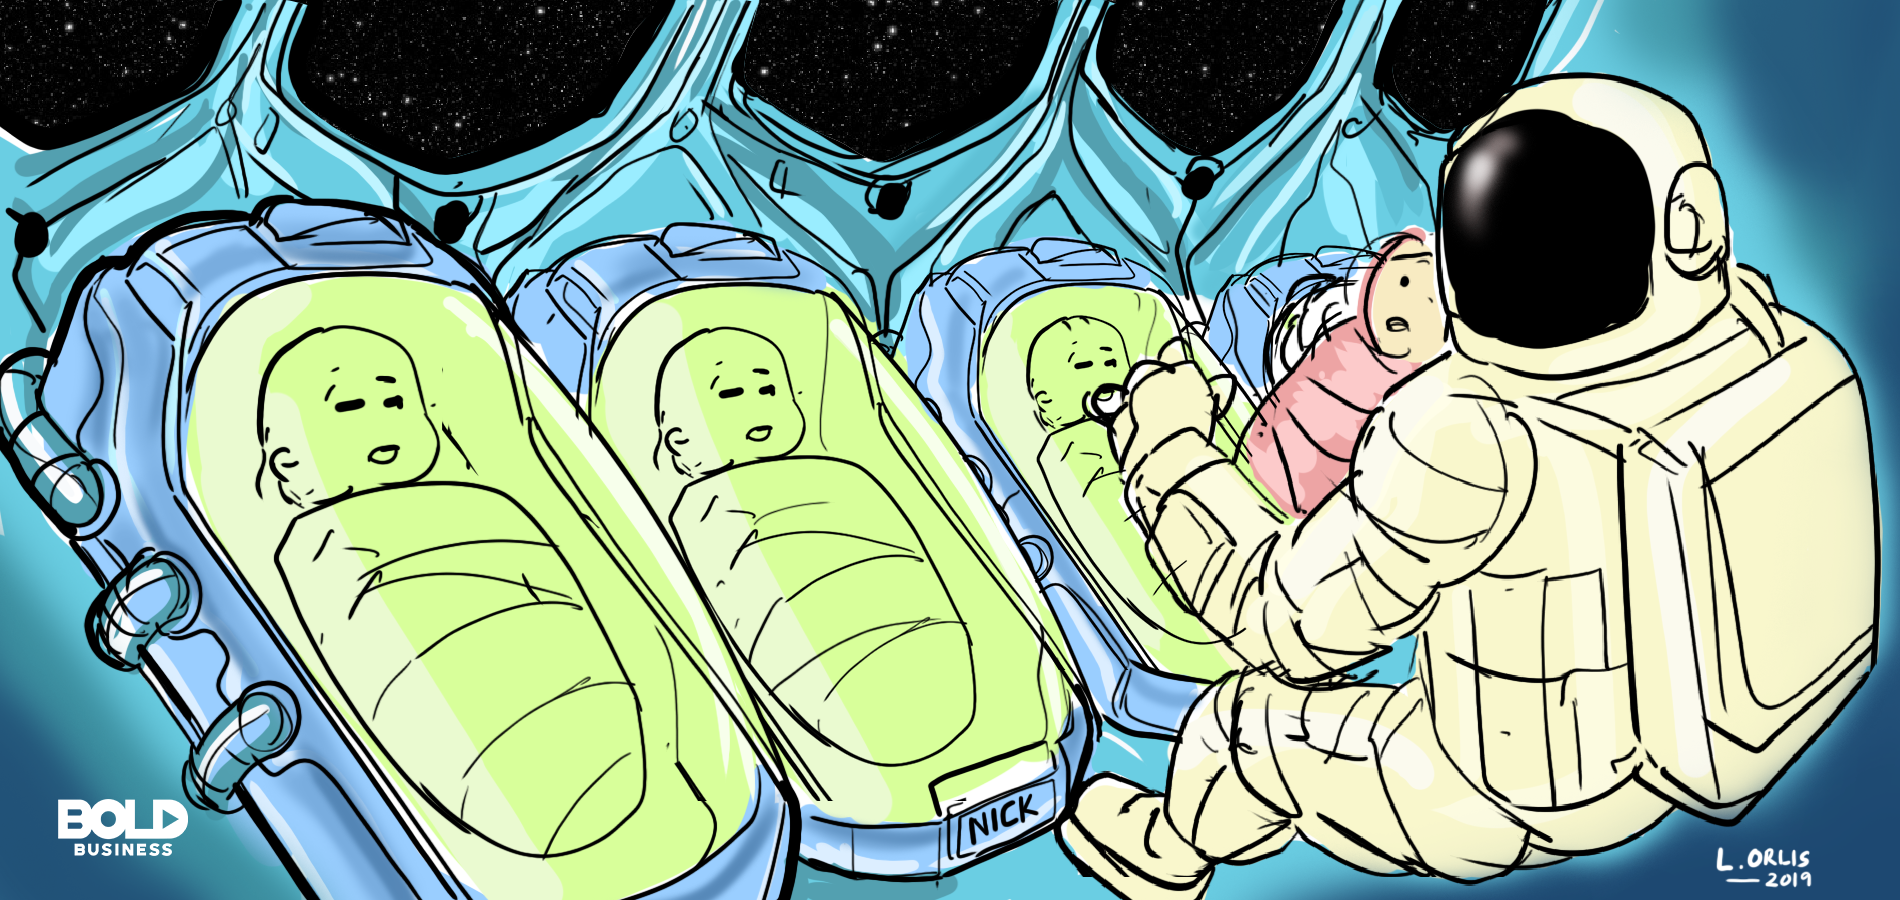 a cartoon of an astronaut taking care of four human babies sleeping in hi-tech tubes inside a rocket ship floating in outer space, in relation to the topic of humans giving birth in space